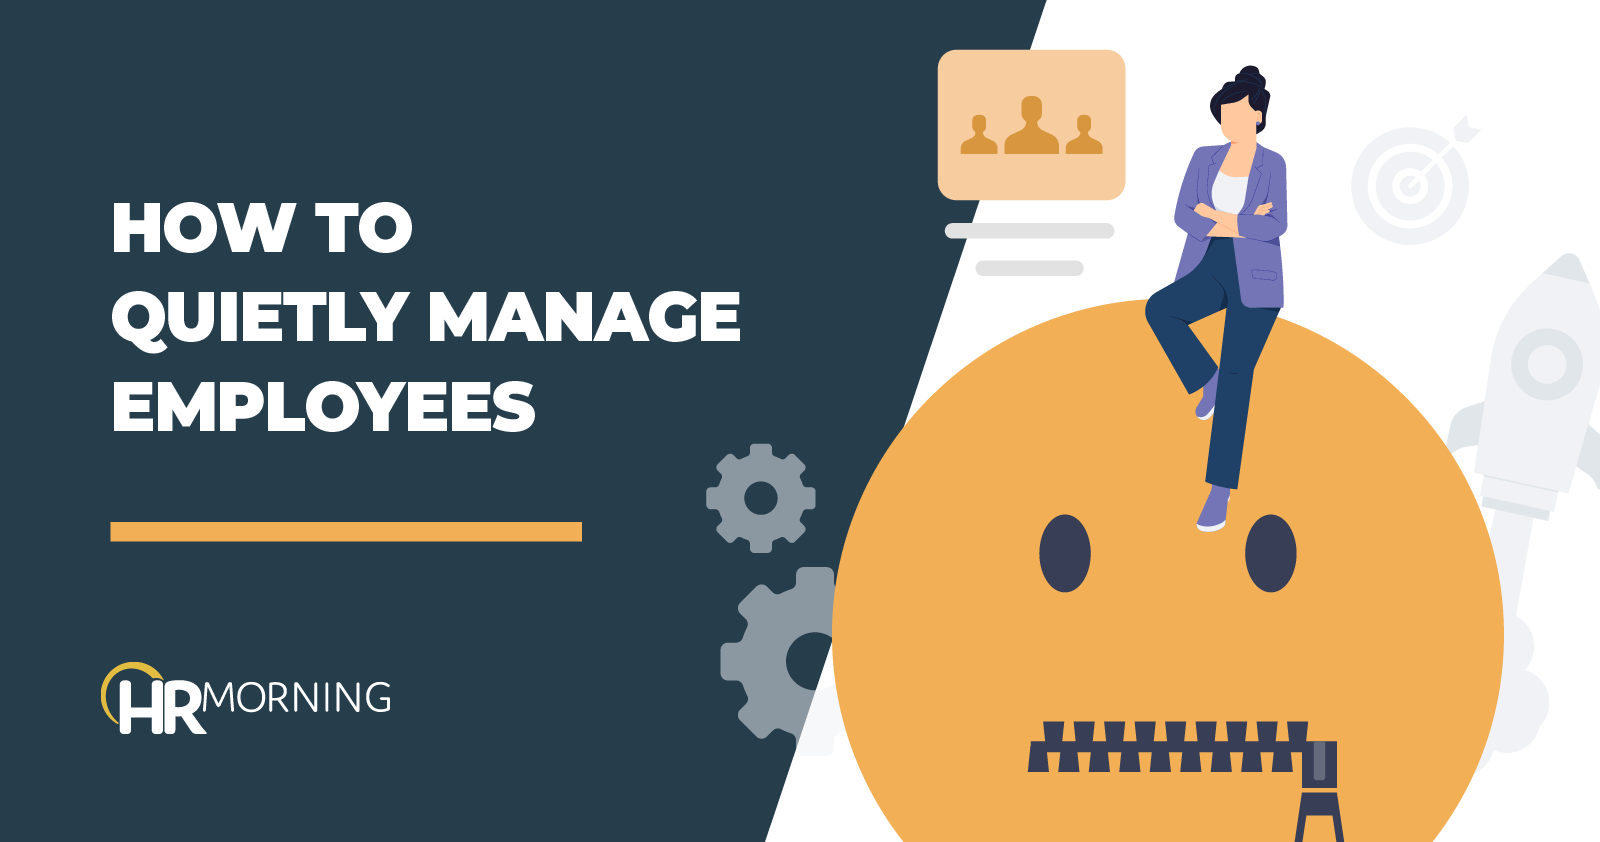 How to quietly manage employees